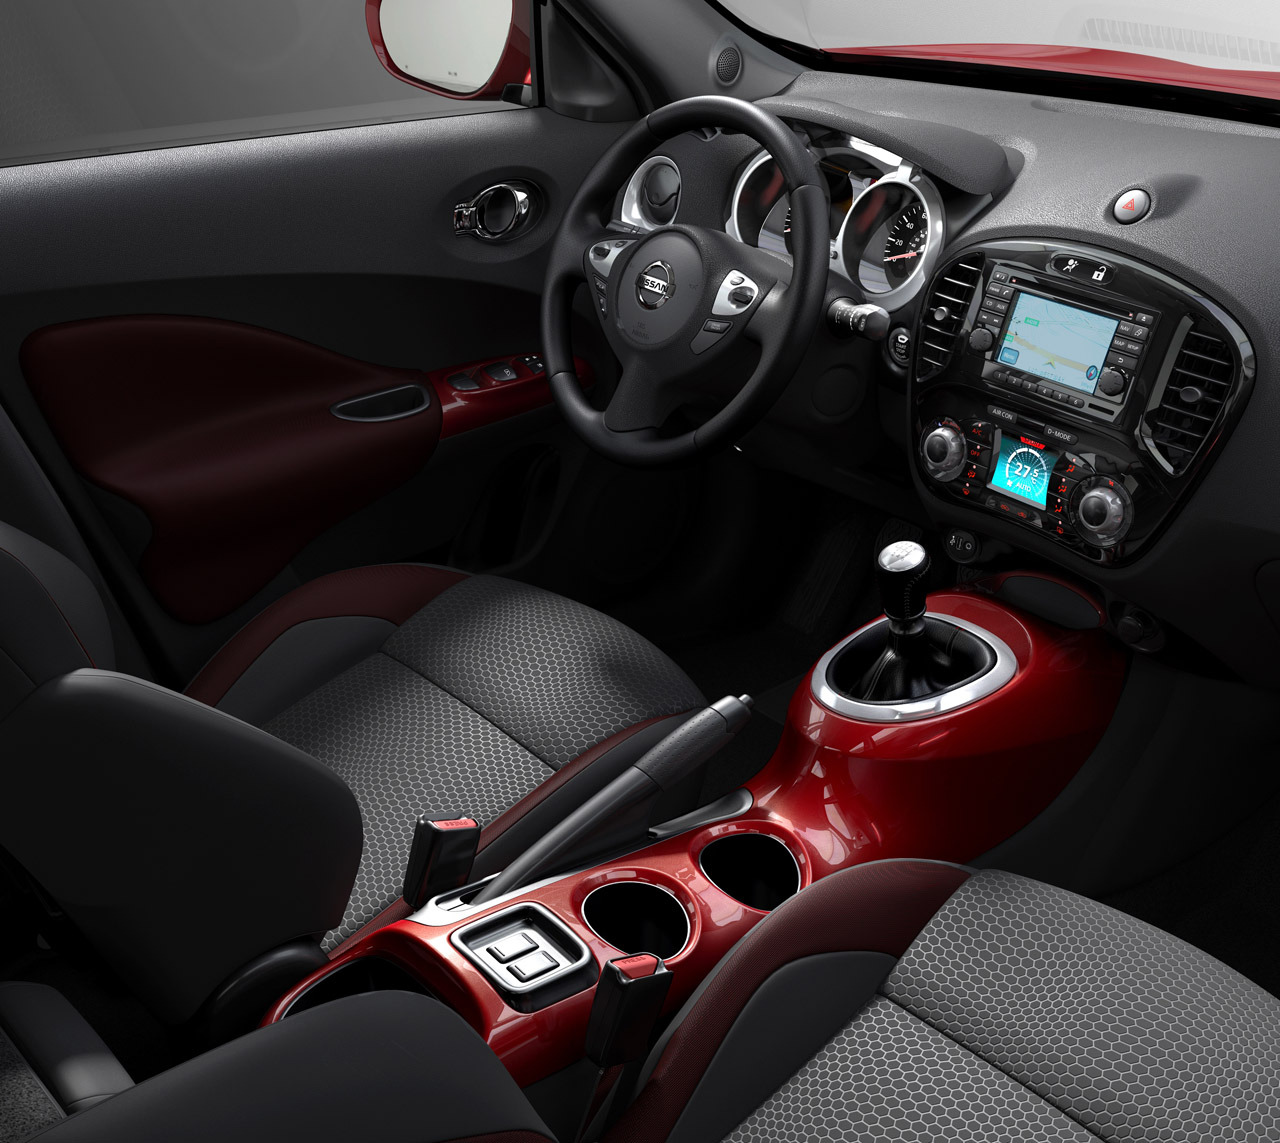 The 2011 Nissan Juke will make its worldwide debut at the Geneva Motor Show